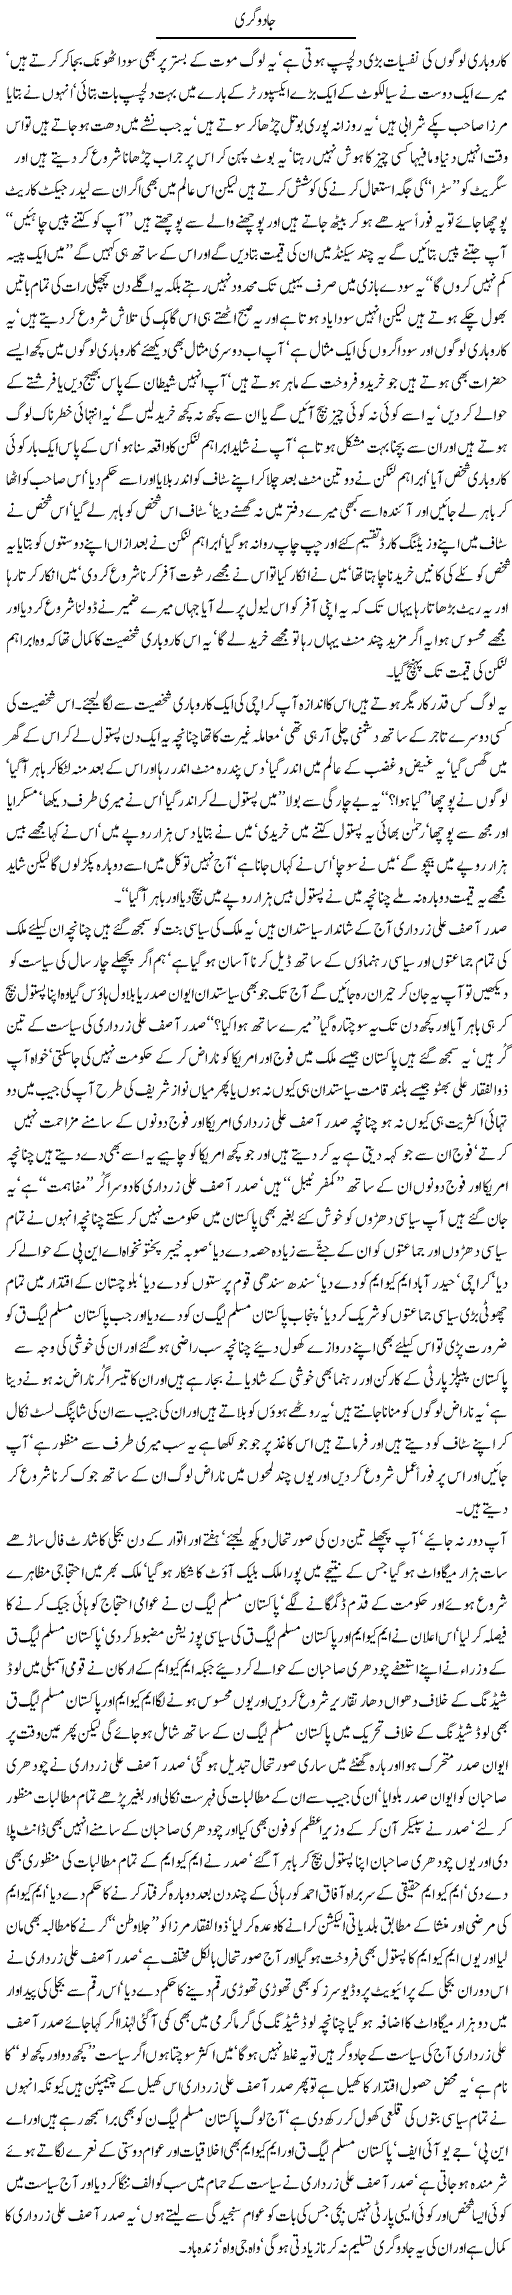 Mind of Businessman Express Column Javed Chaudhry 7 October 2011